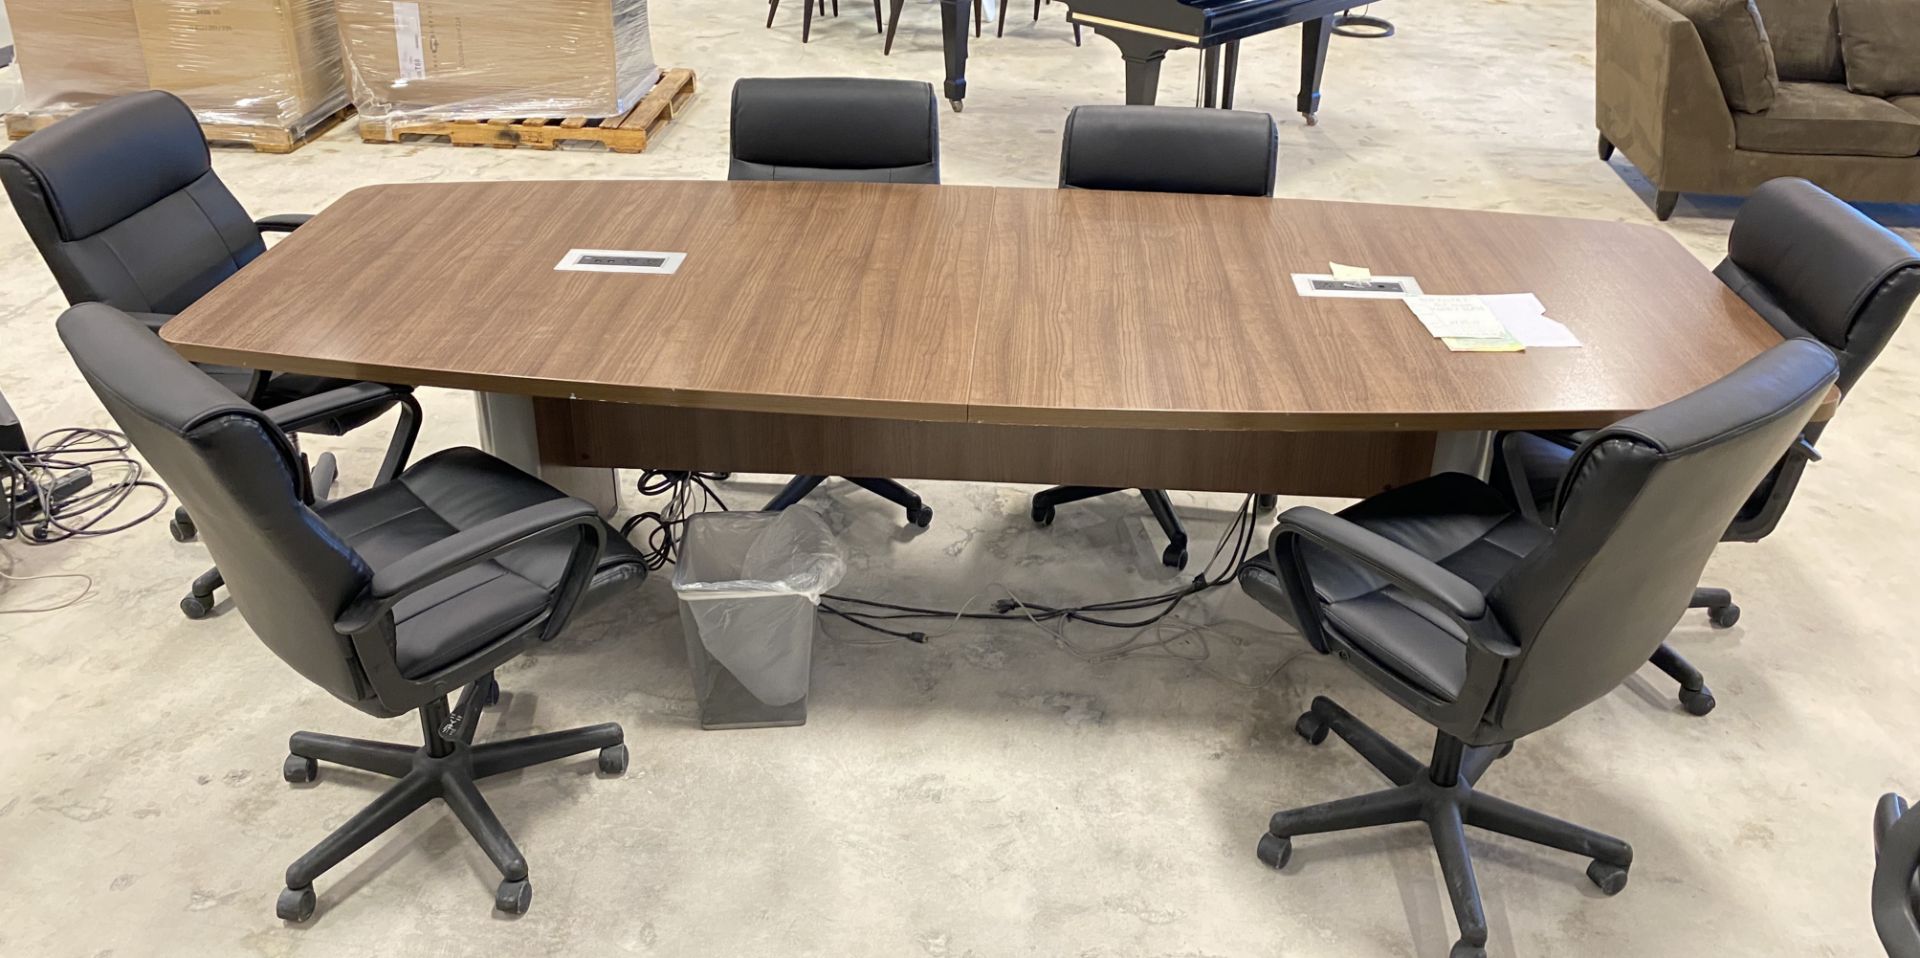 LARGE CONFERENCE TABLE WITH CHAIRS - Image 3 of 4